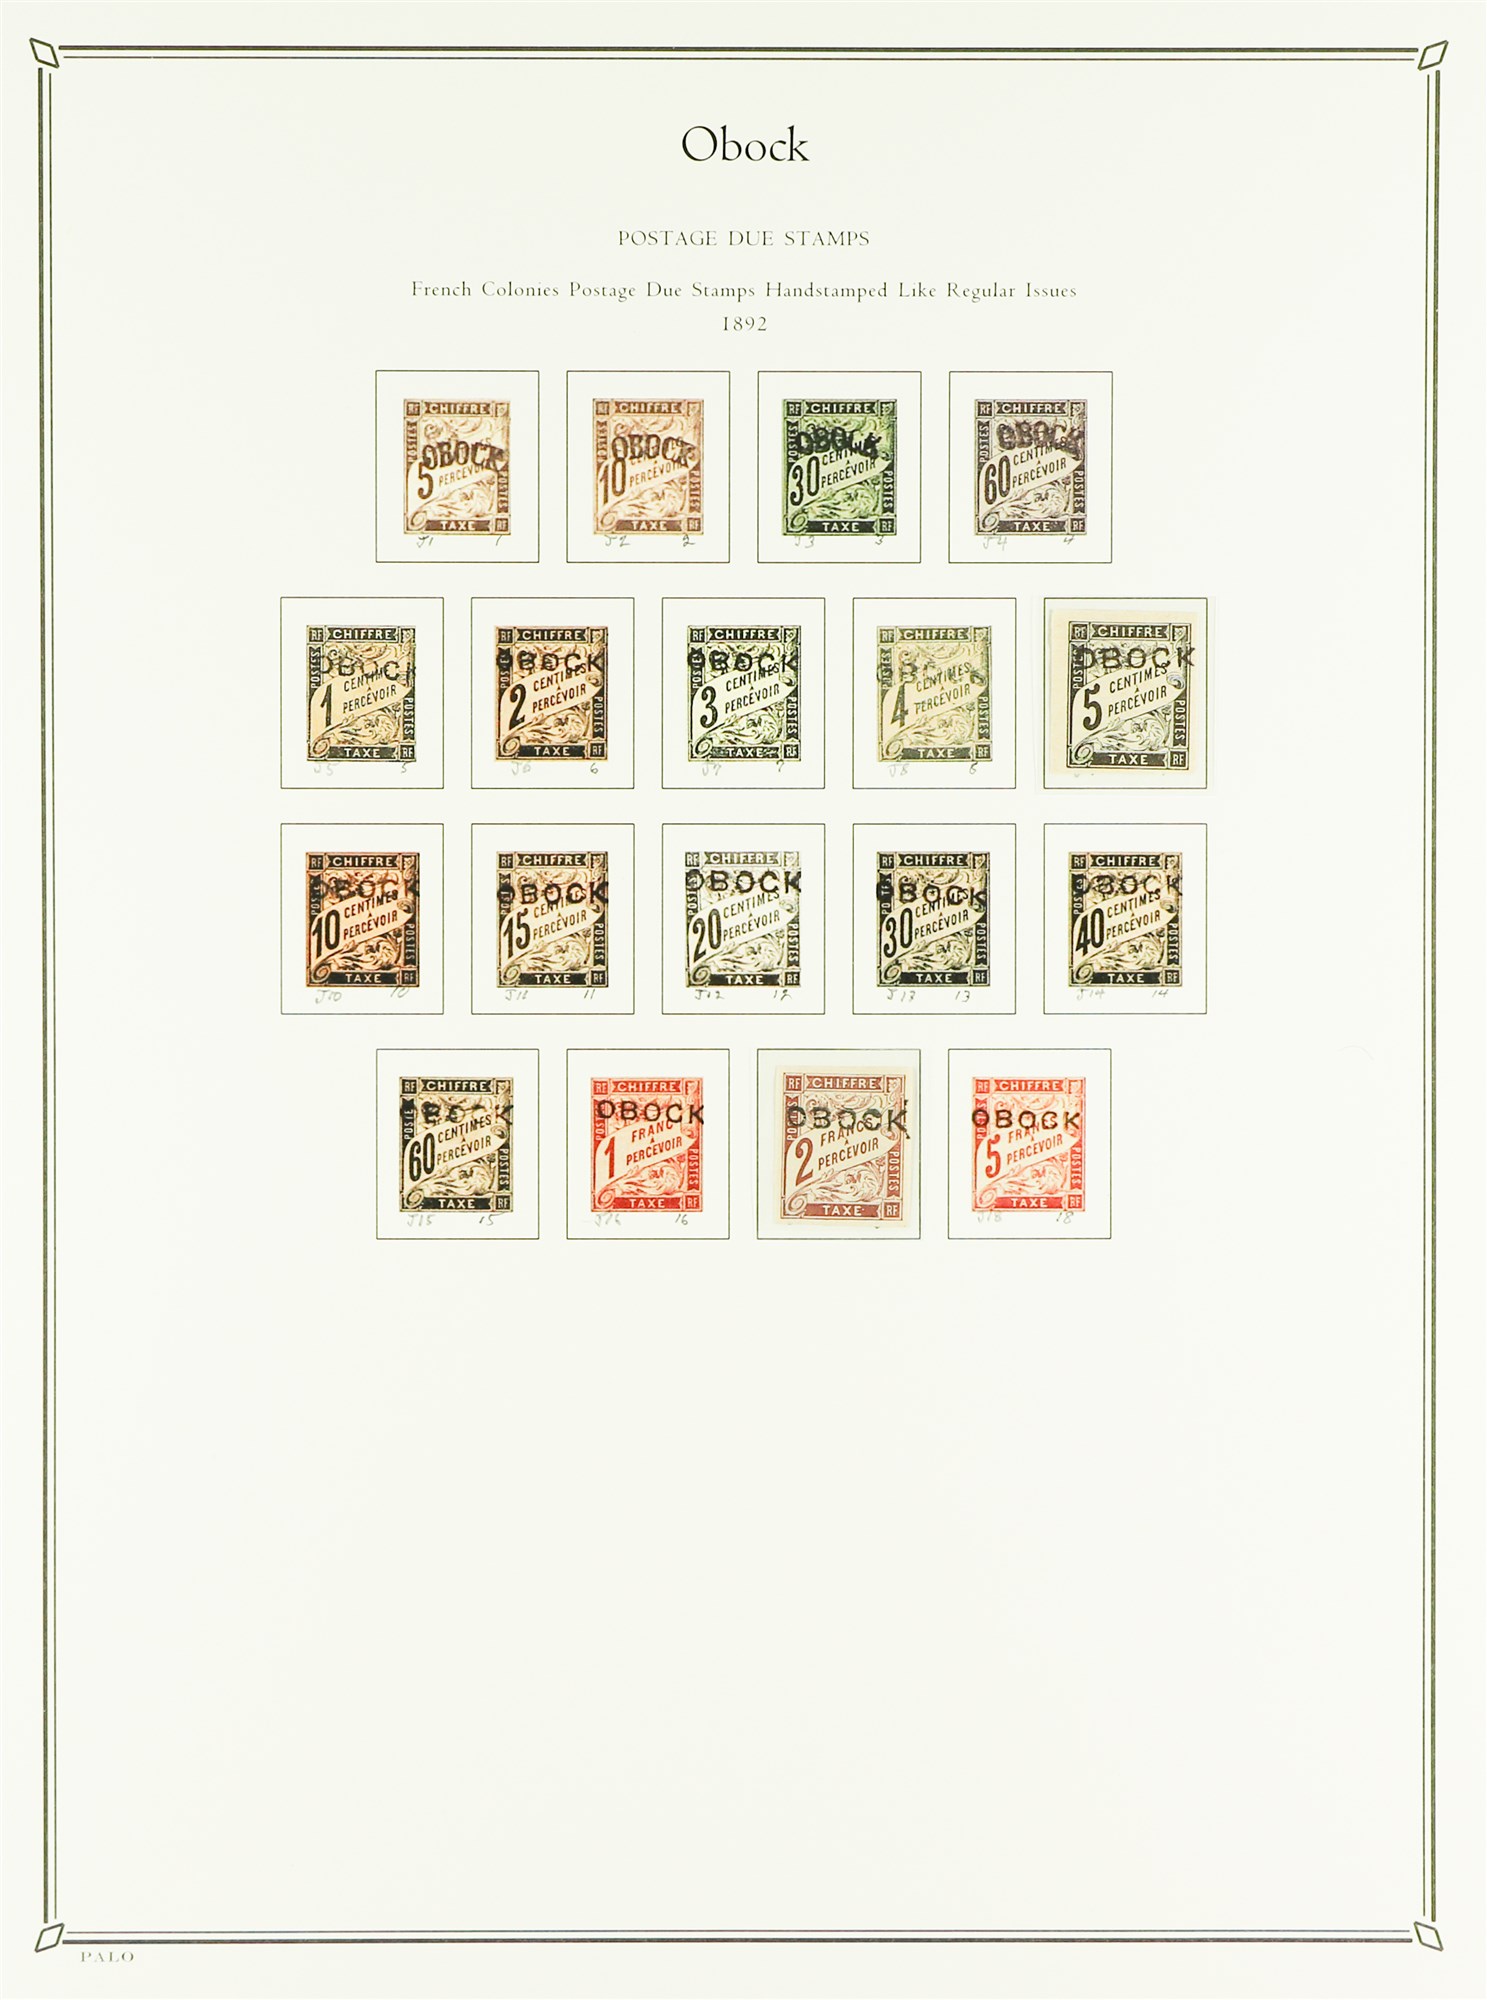 FRENCH COLONIES OBOCK 1892 - 1894 COLLECTION of 35+ mint stamps on Palo hingeless album pages, - Image 5 of 5